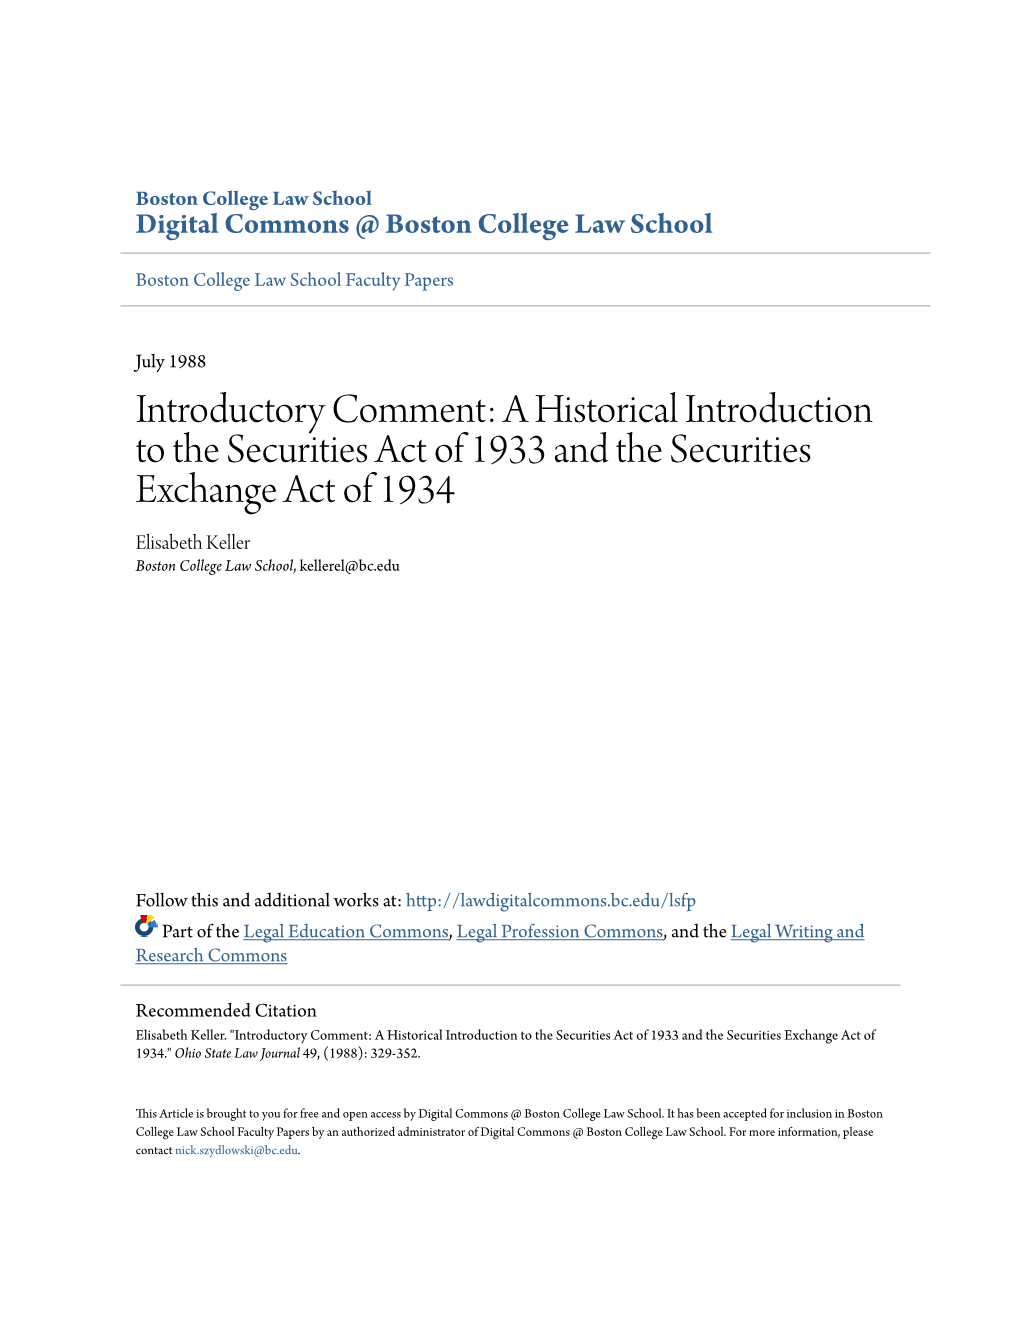 A Historical Introduction to the Securities Act of 1933 and the Securities Exchange Act of 1934 Elisabeth Keller Boston College Law School, Kellerel@Bc.Edu